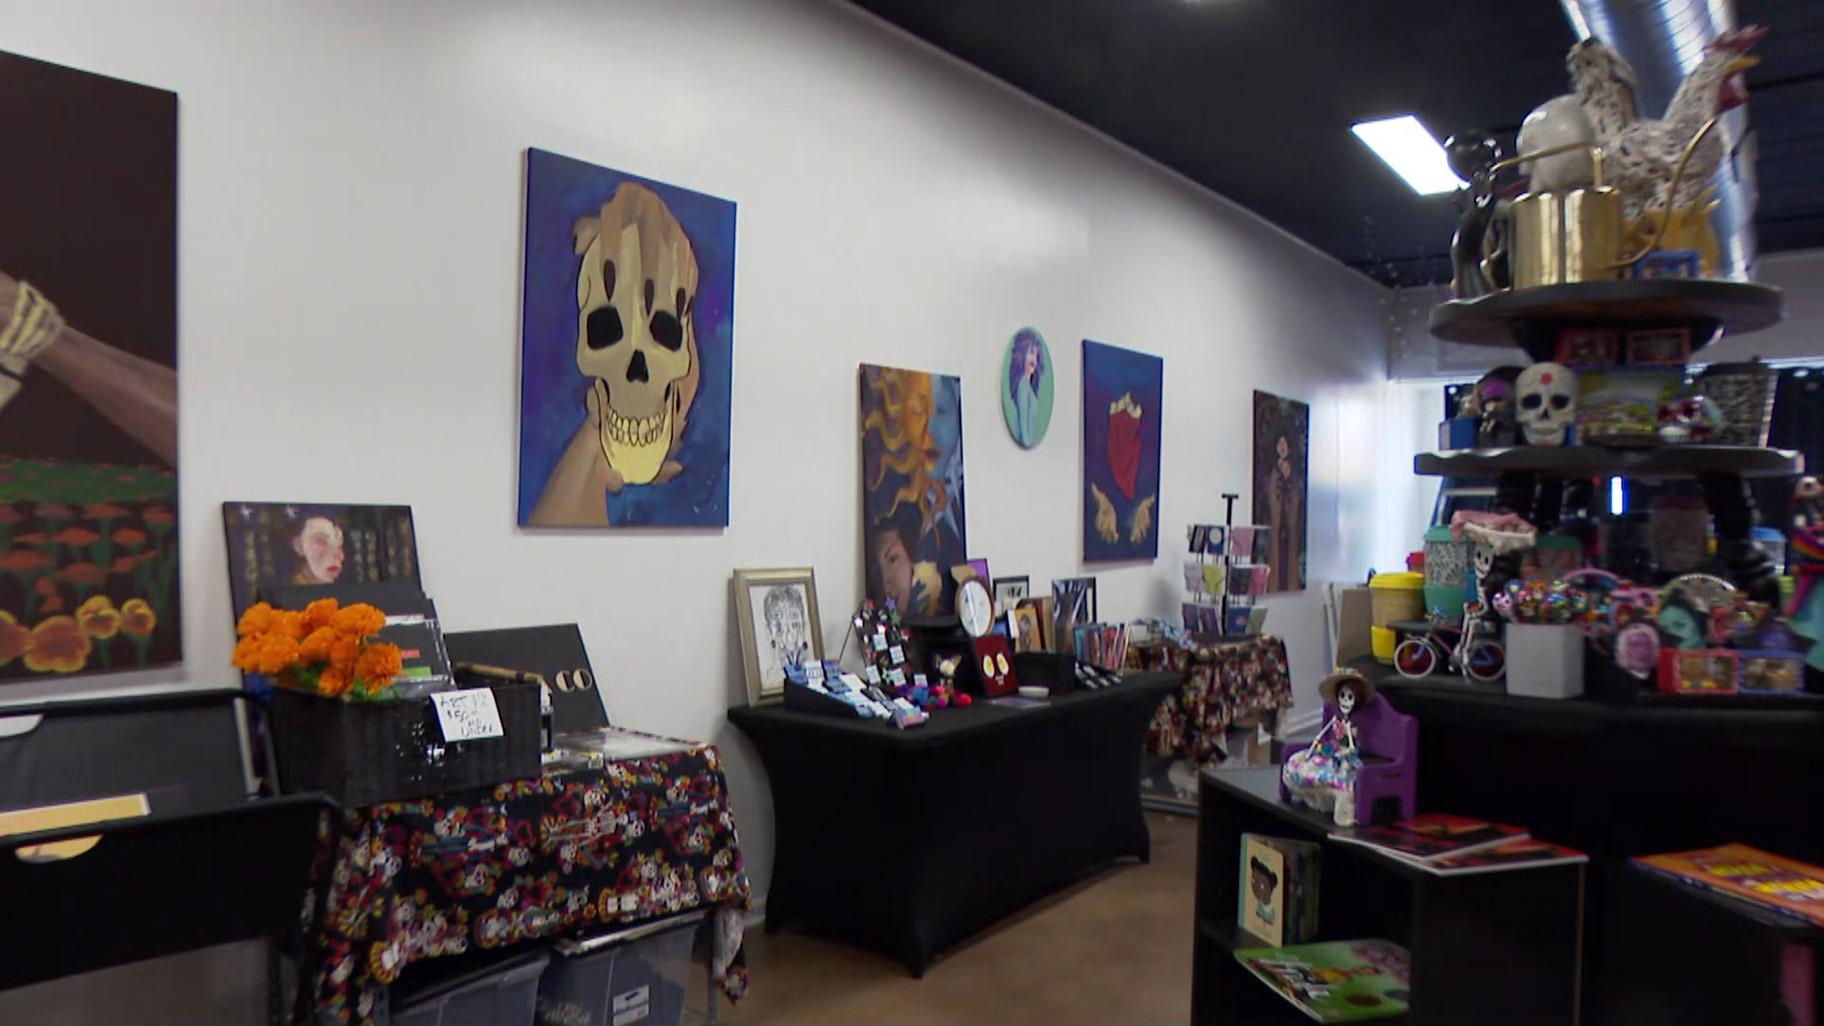 In Evergreen Park, Brewja Co is hosting a one-day pop-up on Dec. 23, offering freshly roasted coffee, Mexican hot chocolate, and items from Chicago-area artists. (WTTW News)